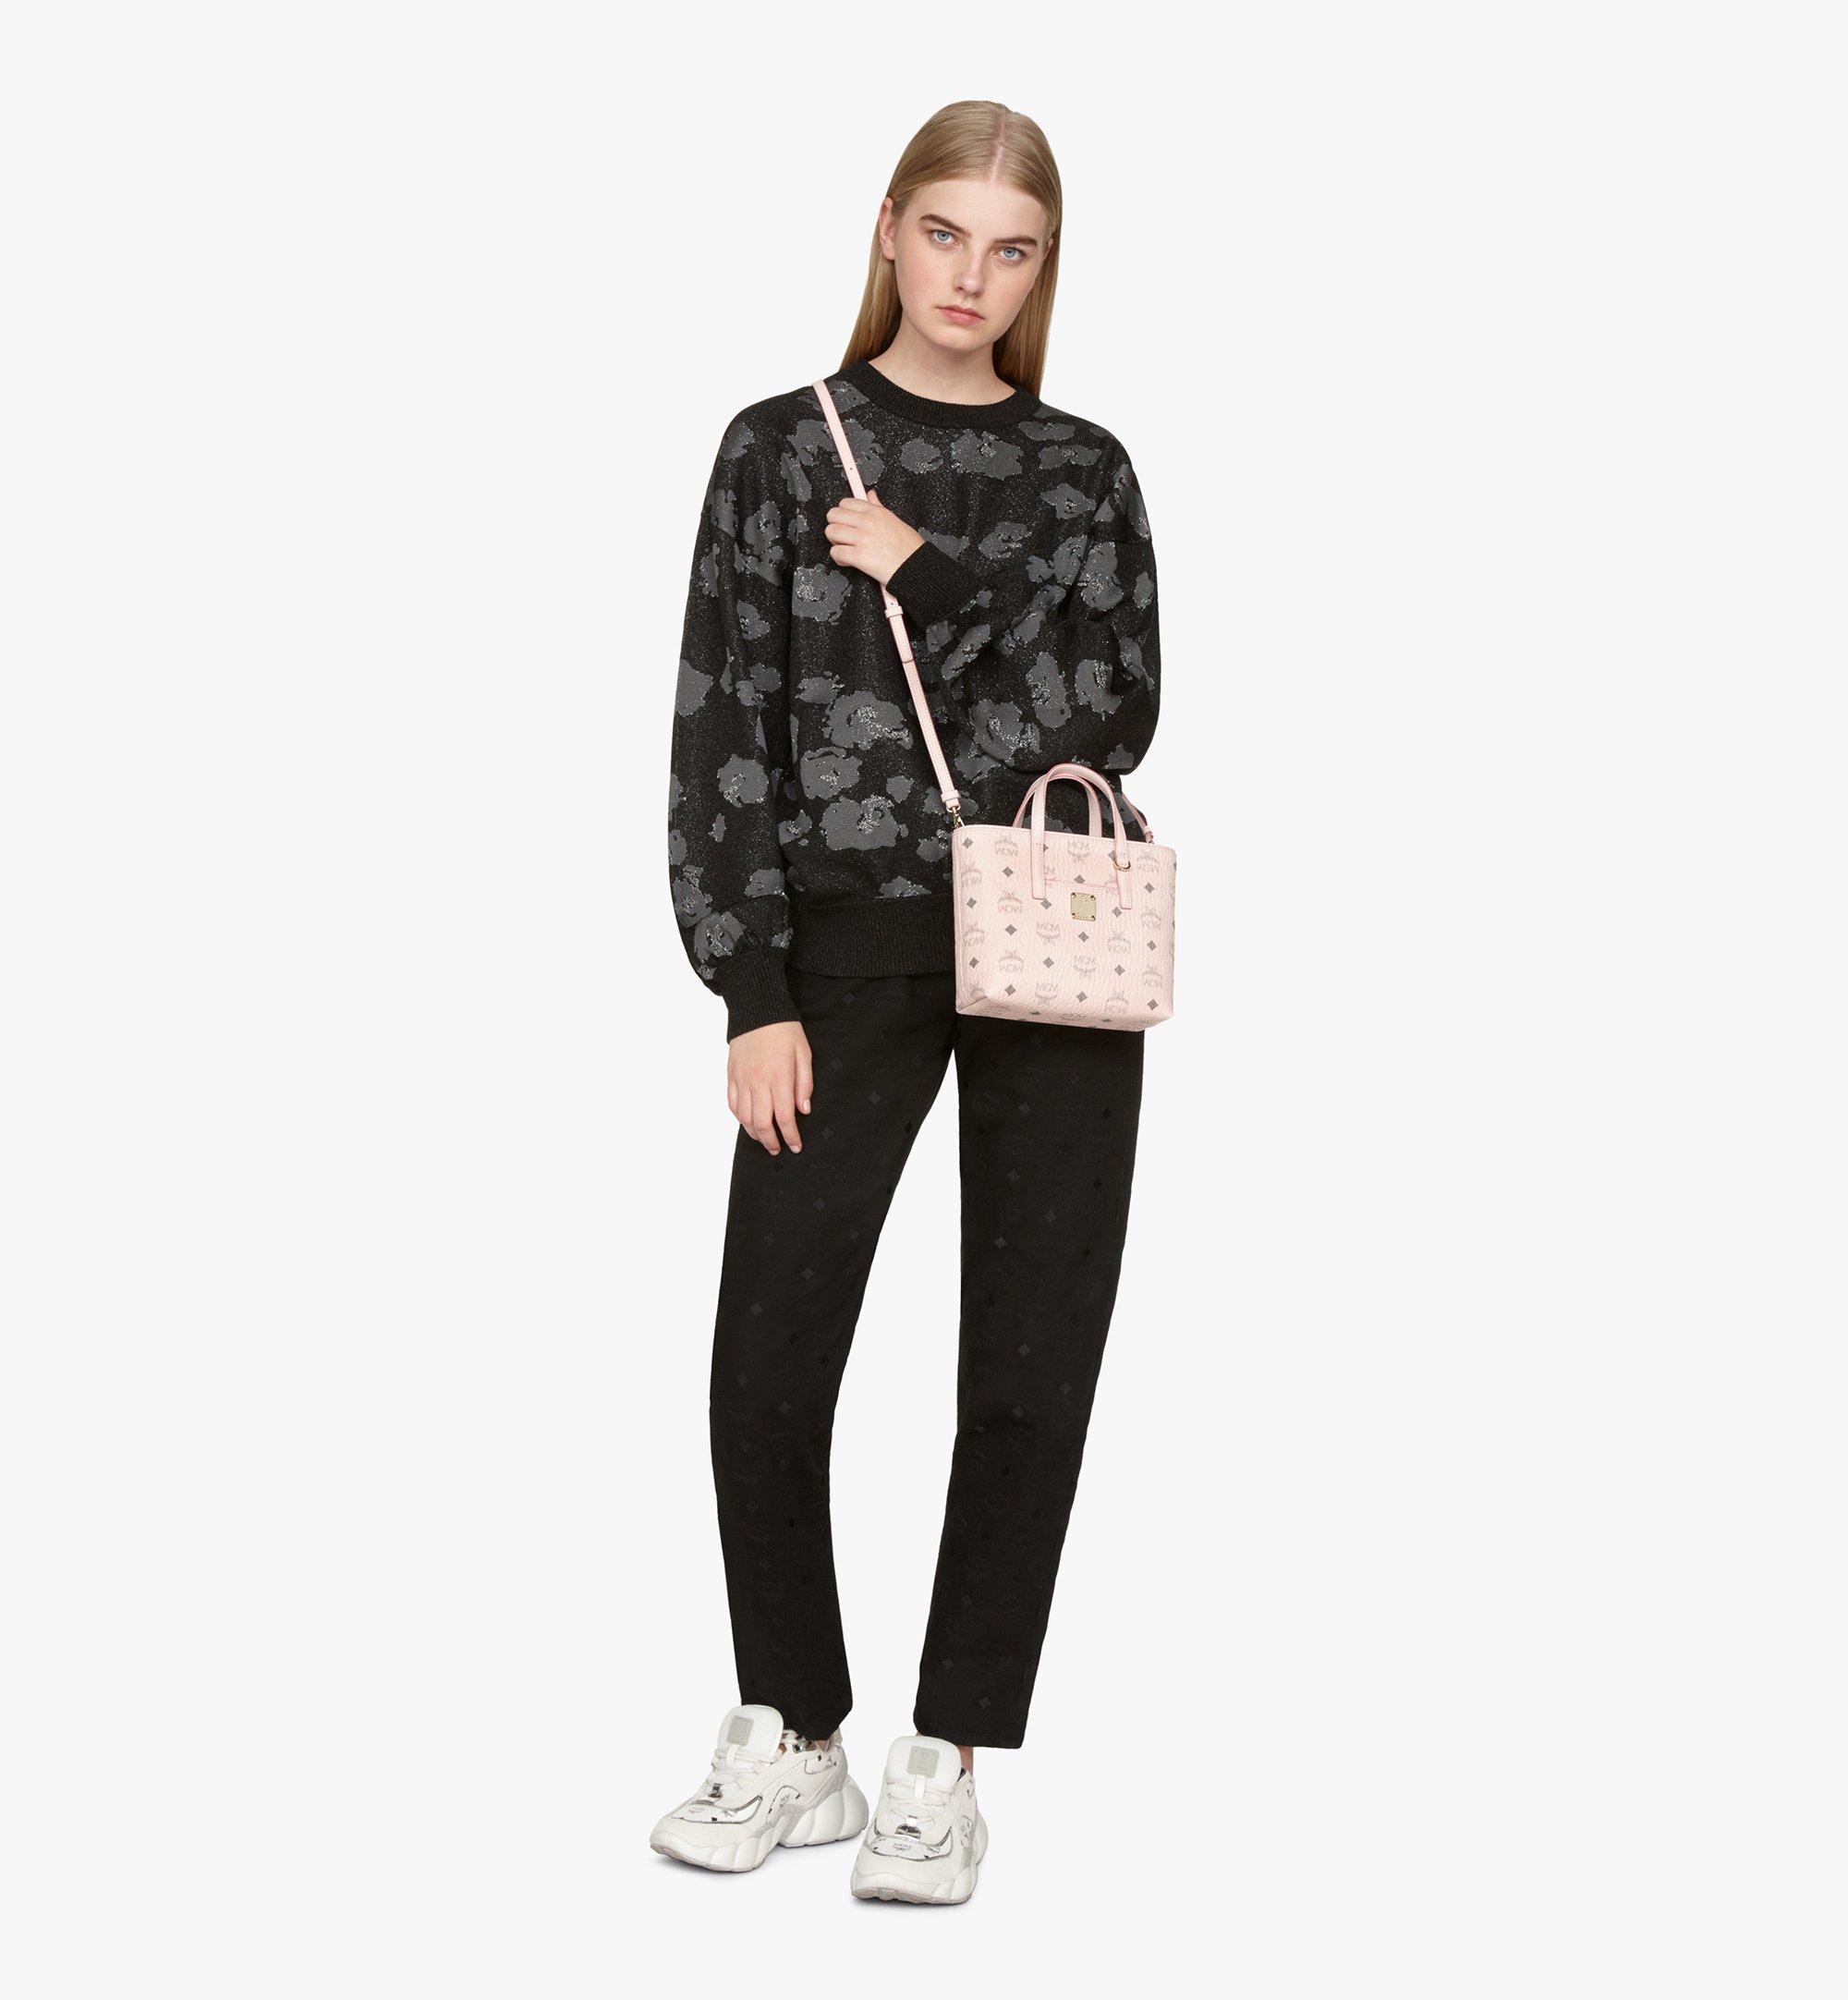 Small Anya Shopper In Visetos Gold MCM ®TH | vlr.eng.br